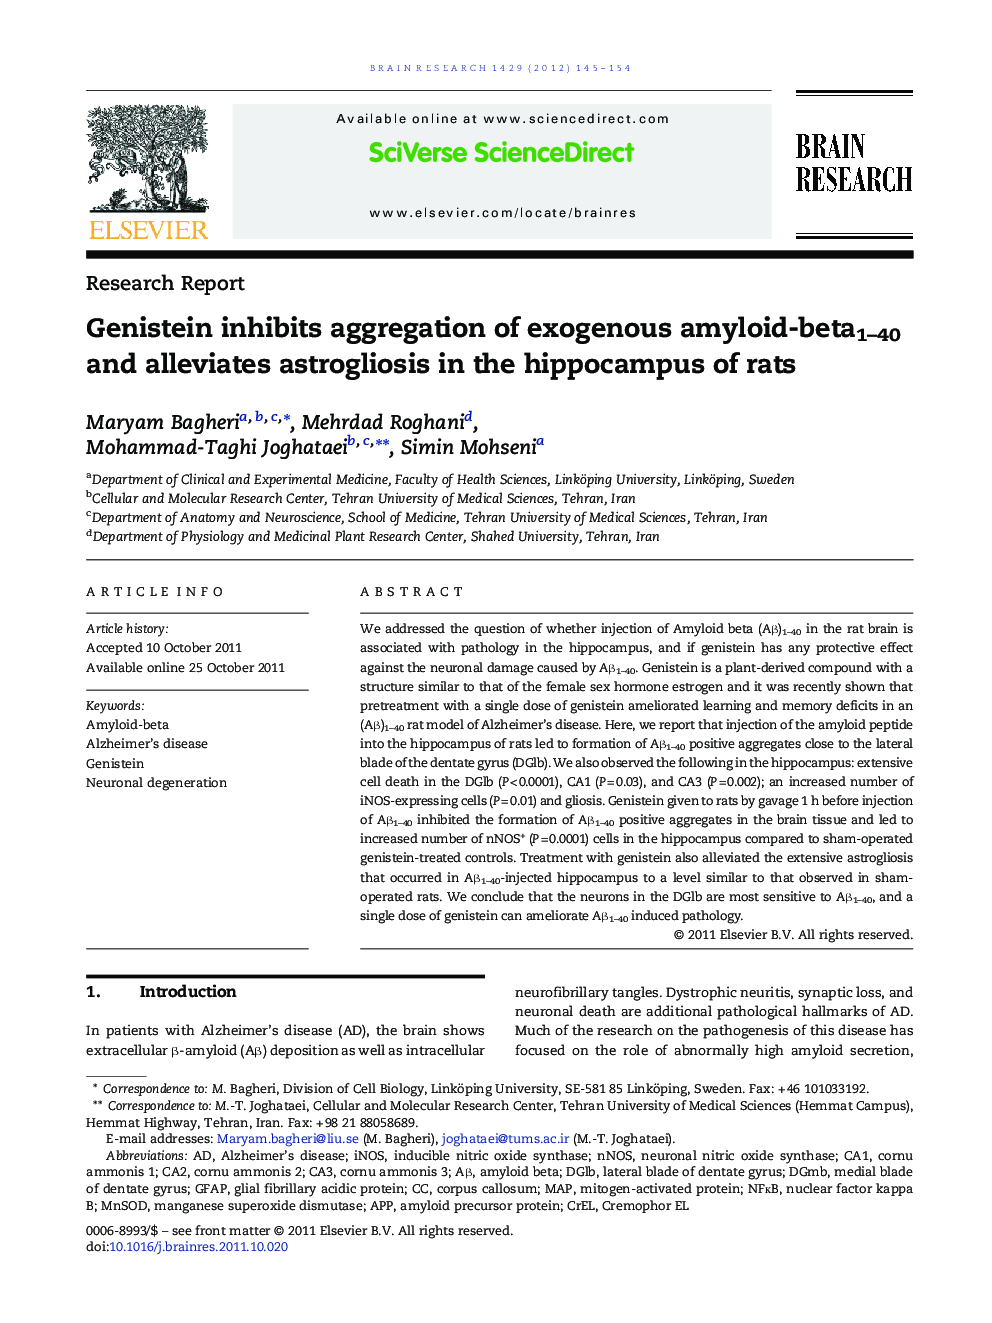 Research ReportGenistein inhibits aggregation of exogenous amyloid-beta1-40 and alleviates astrogliosis in the hippocampus of rats